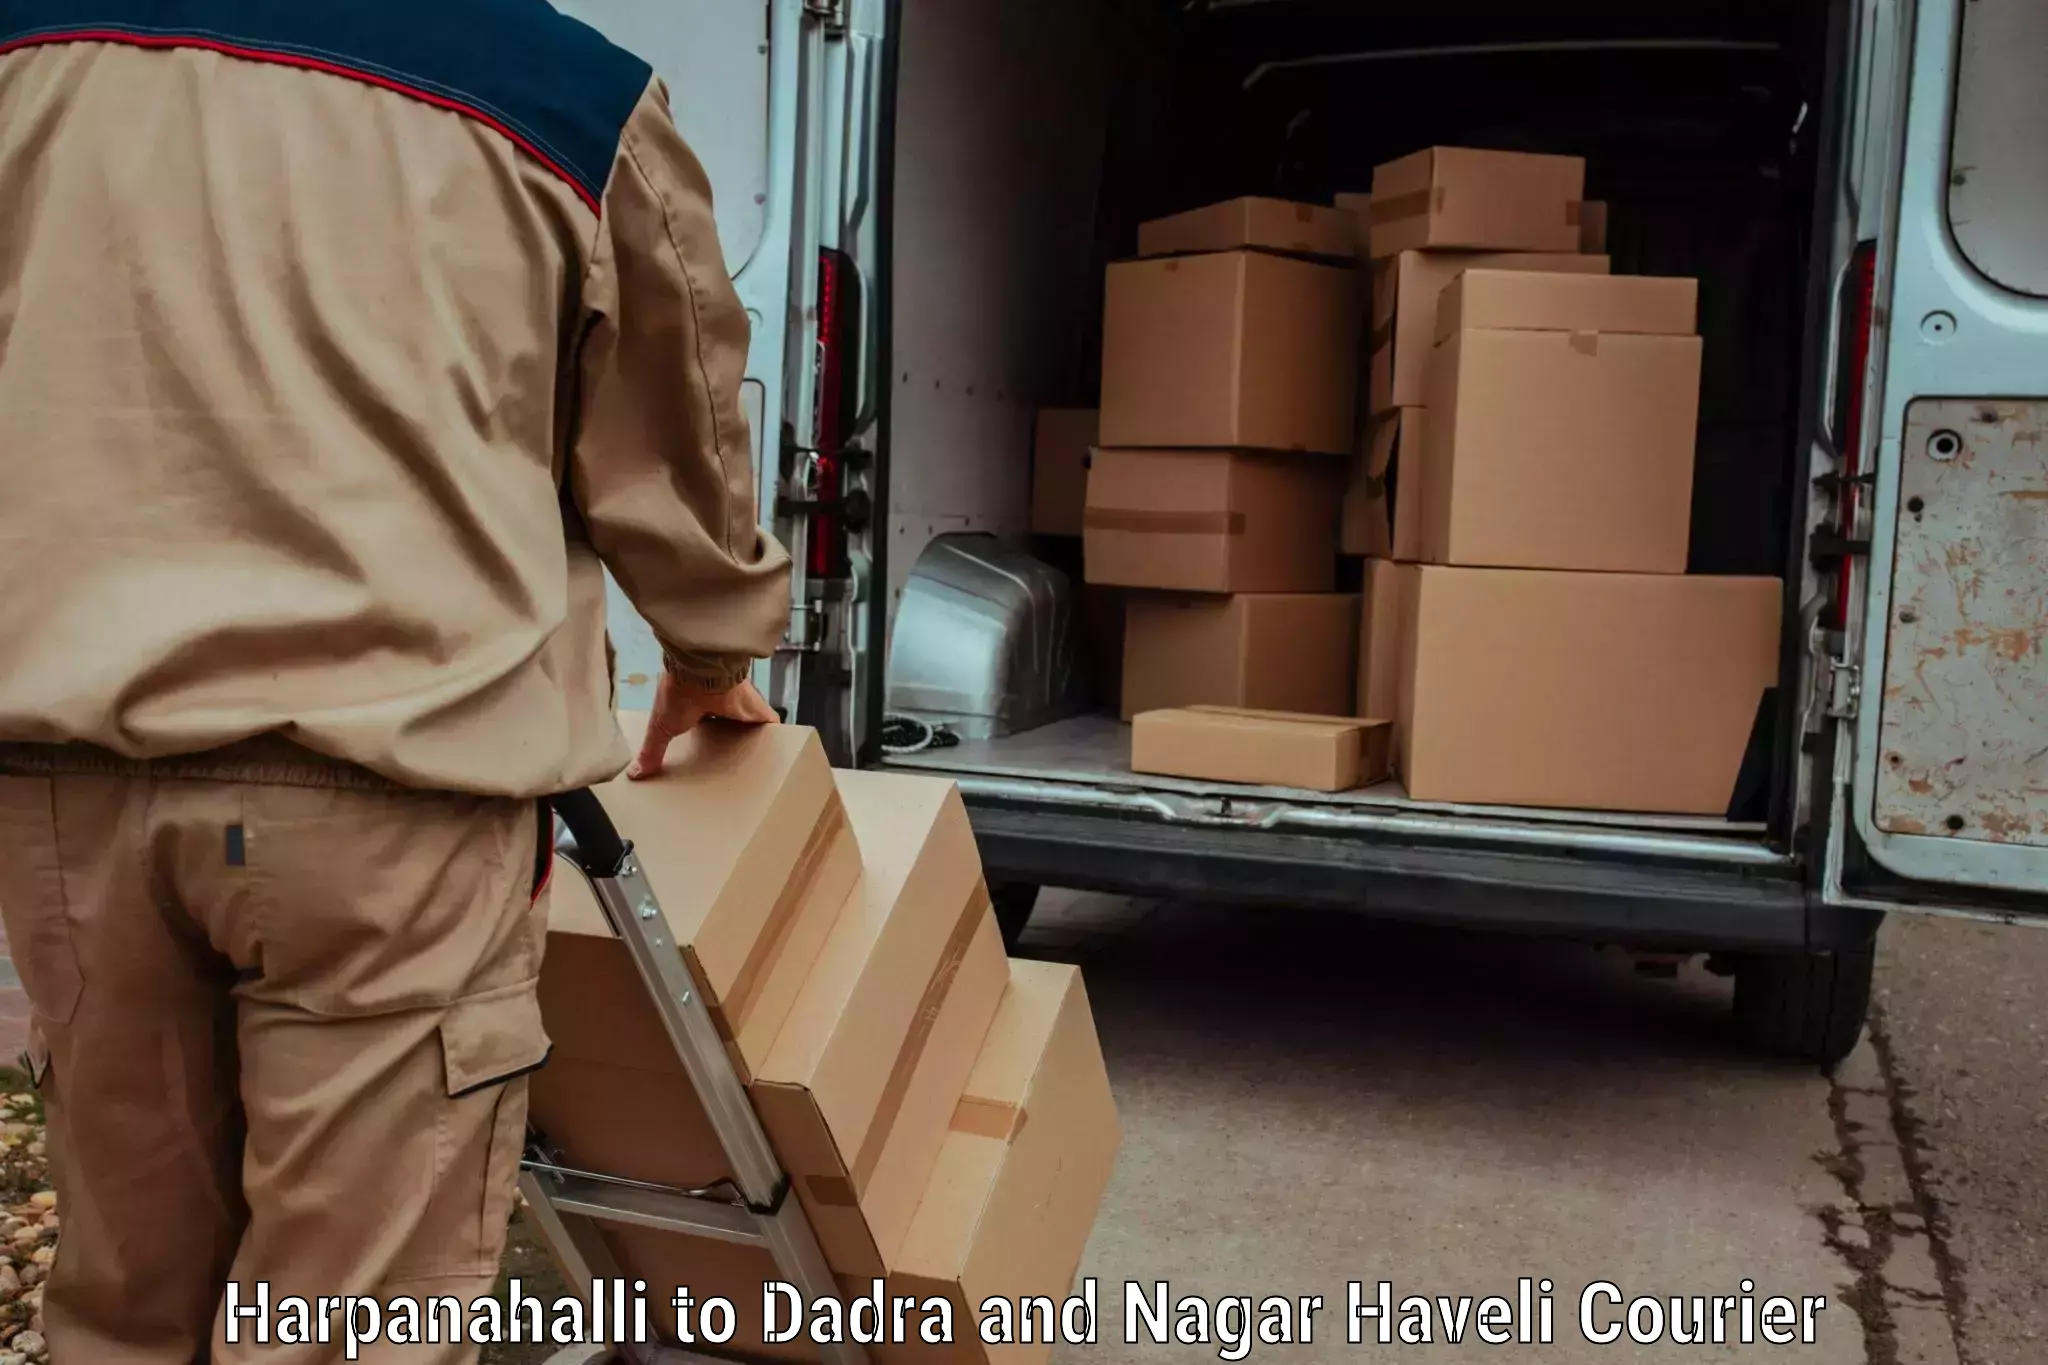 Overnight delivery services Harpanahalli to Dadra and Nagar Haveli